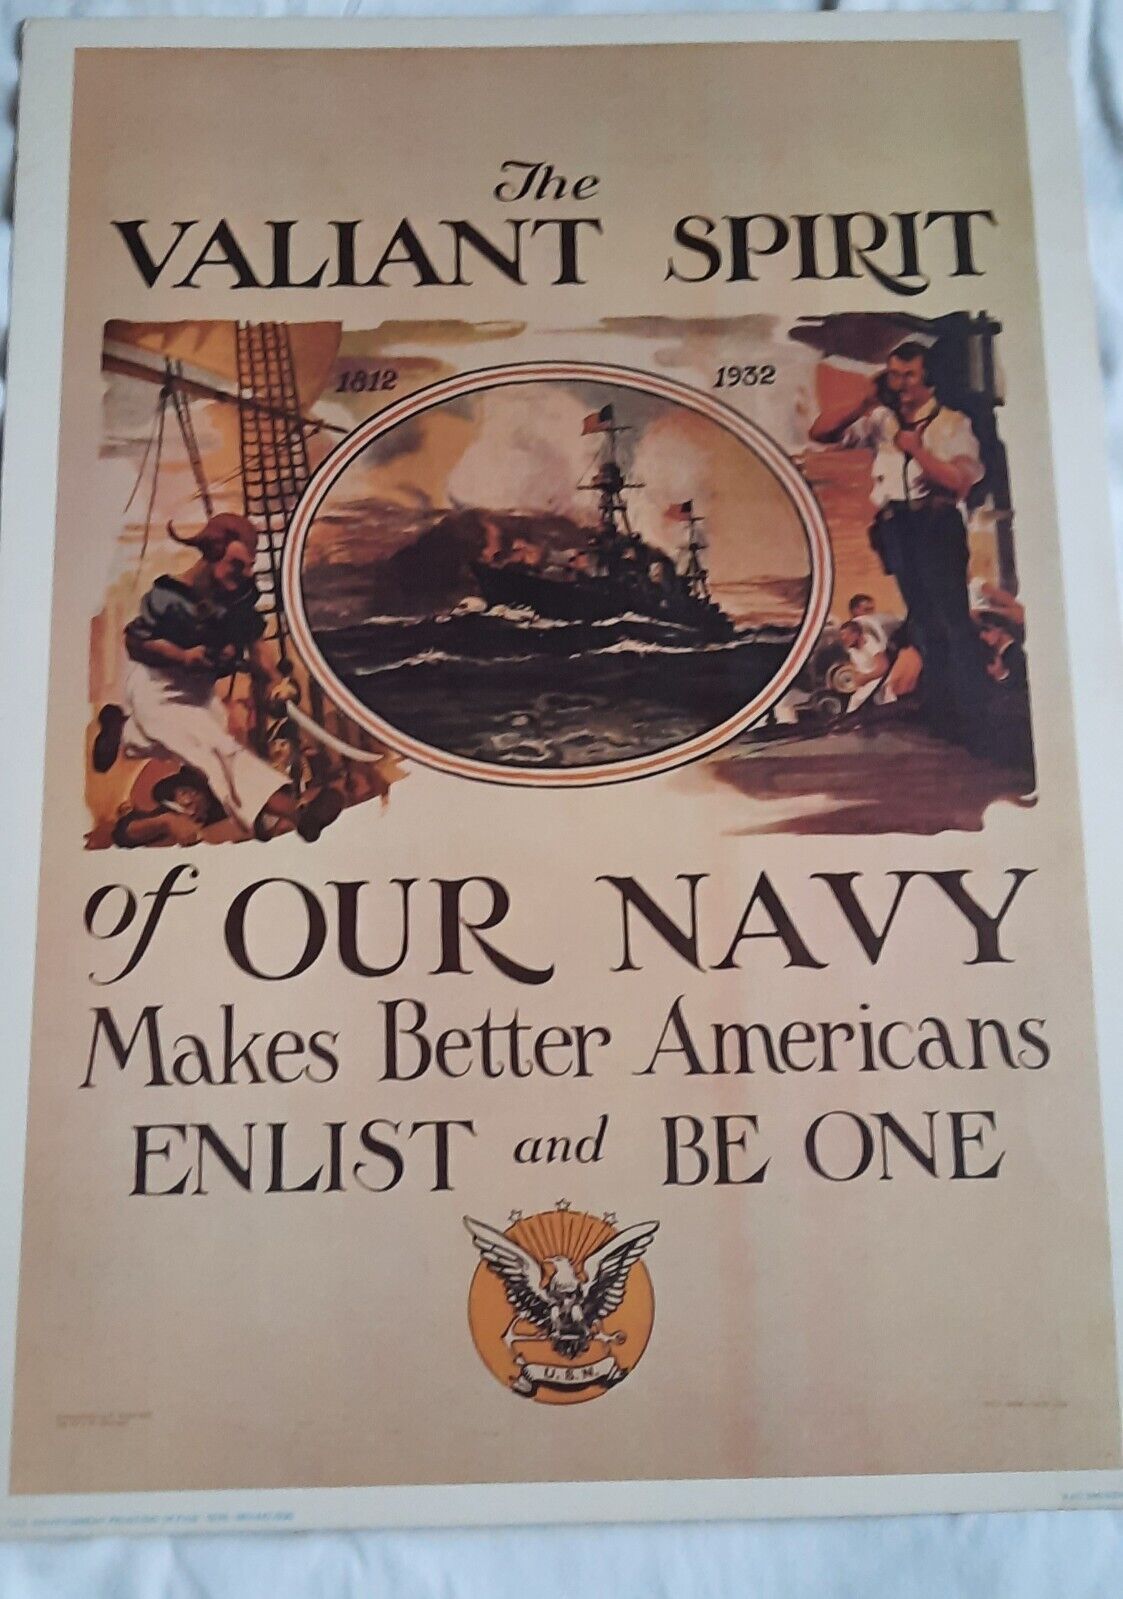 Vintage Us Navy Recruitment Poster 16 X 20" The Valiant Spirit Of Our Navy